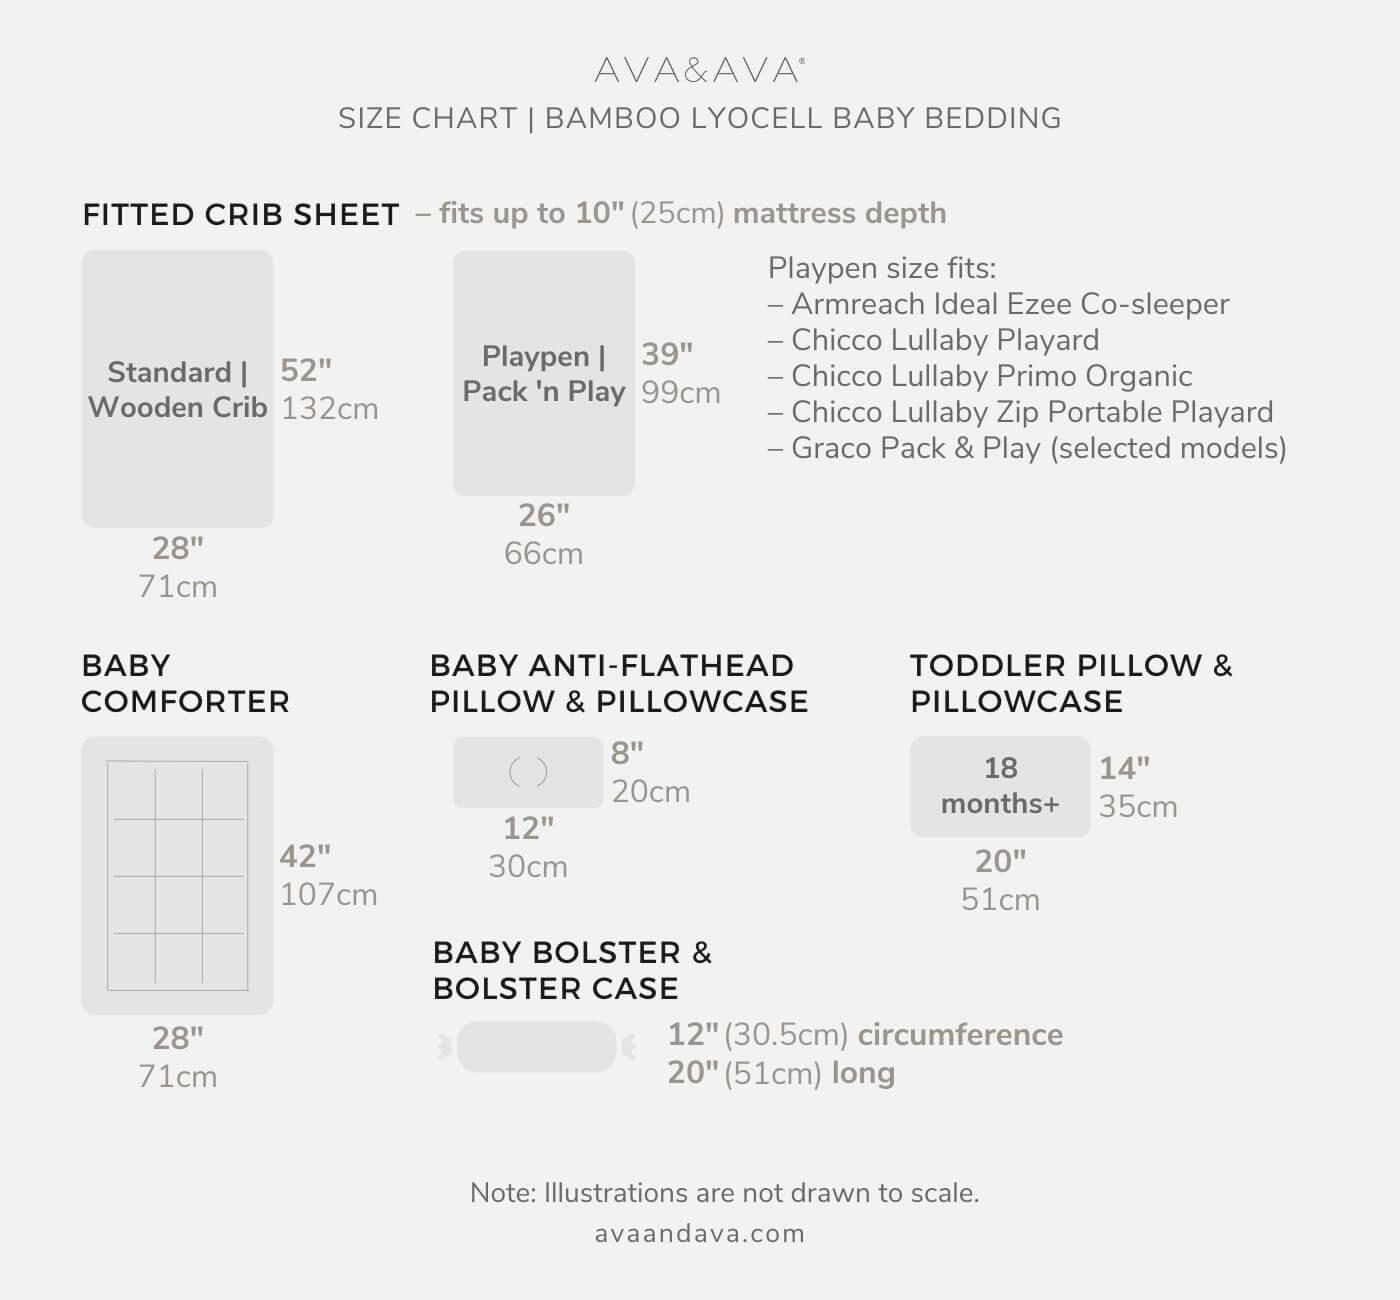 ava and ava organic bamboo baby bedding and bed sheets size chart philippines in inches and in cm- fitted crib sheet for wooden crib 28 x 52 and playpen, baby pillows and bolsters, baby comforter, anti-flat head pillows, pillowcases and bolstercases